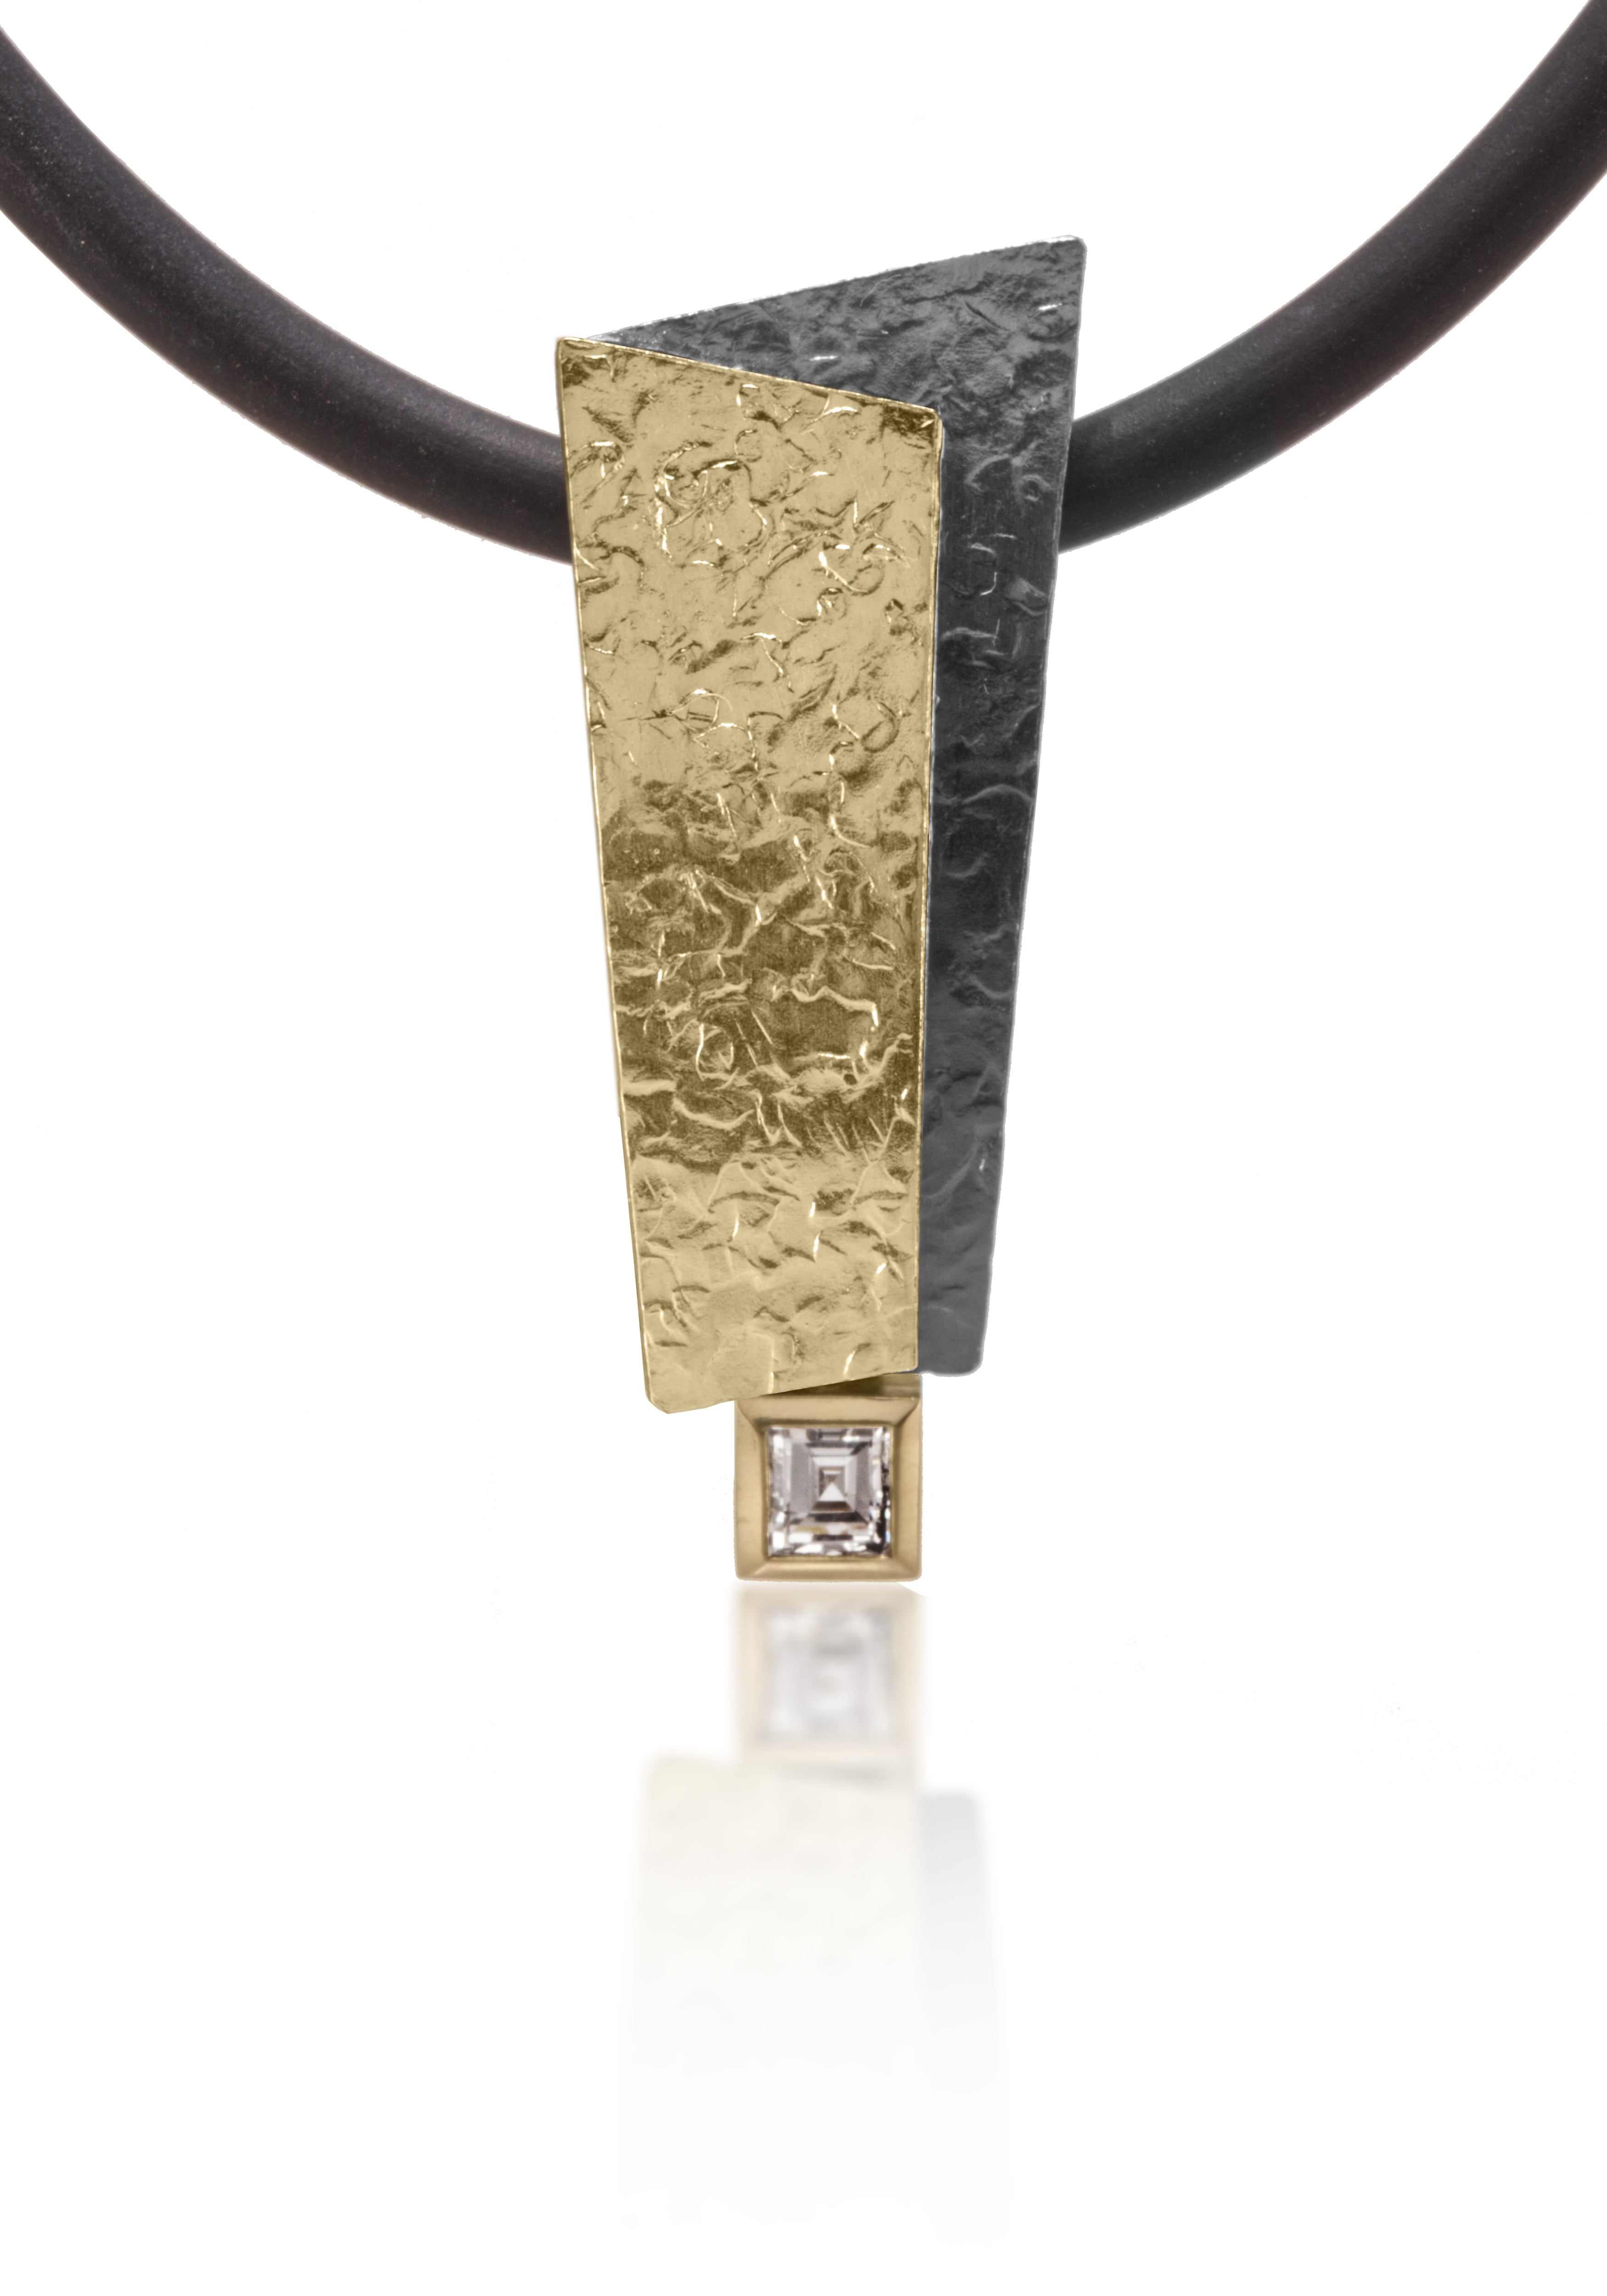 This Cyclone Pendant in 18k gold, 18k bimetal and oxidized silver offers a stunning contrast of precious metals.  This statement piece culminates with a bezel set white carré cut 0.28ct rectangular diamond. Entirely hand fabricated, hammer textured. Shown on a 3mm rubber cord, not included.